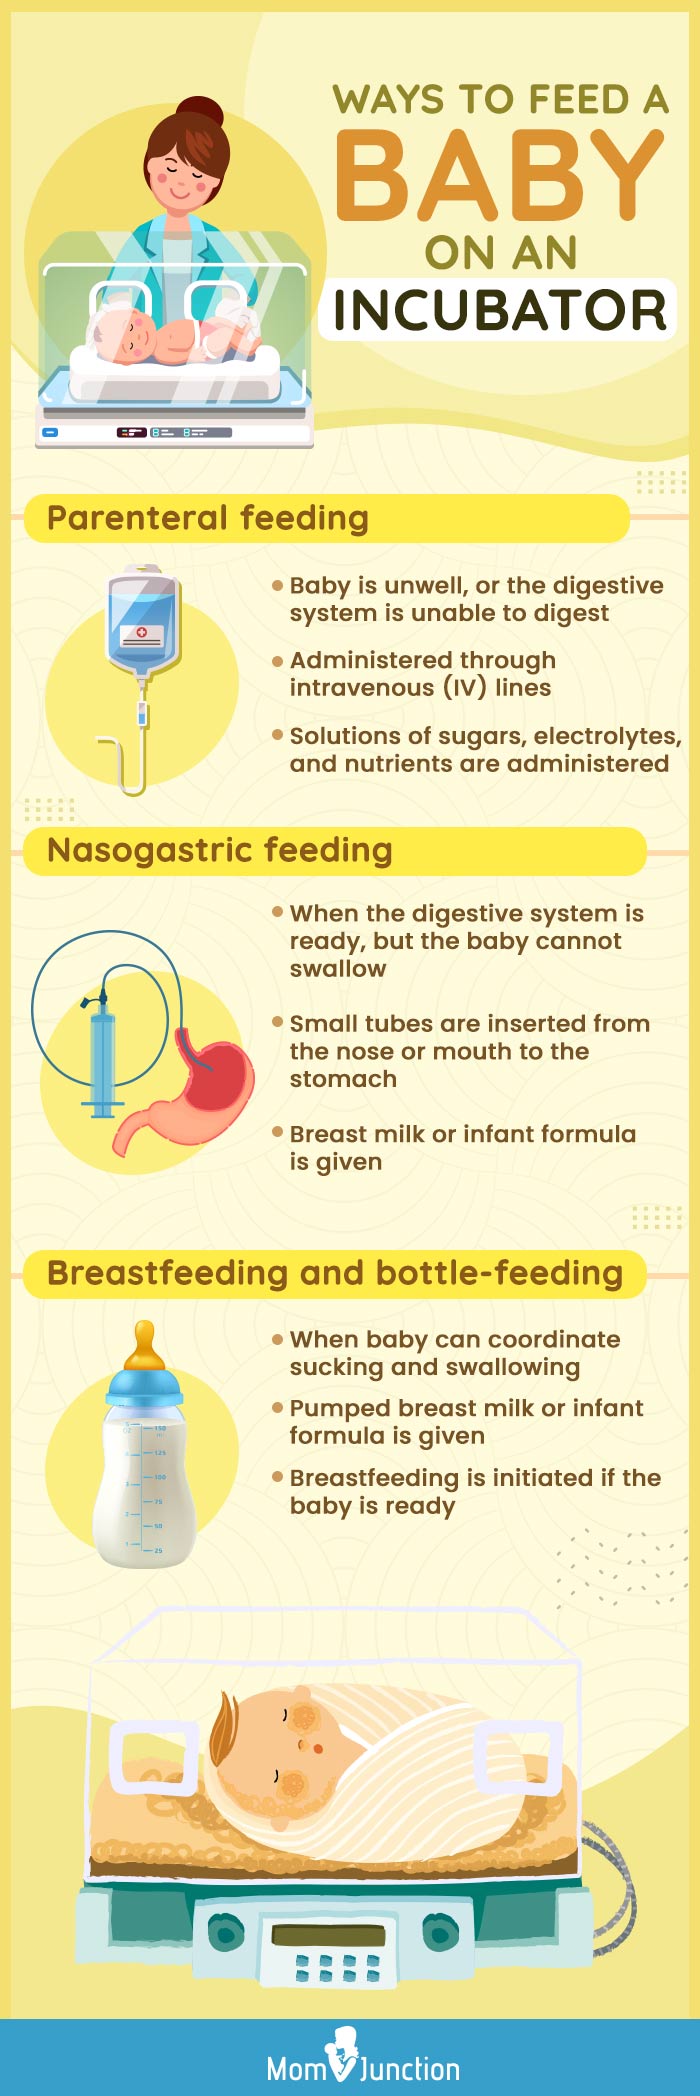 how are premature babies on an incubator fed [infographic]